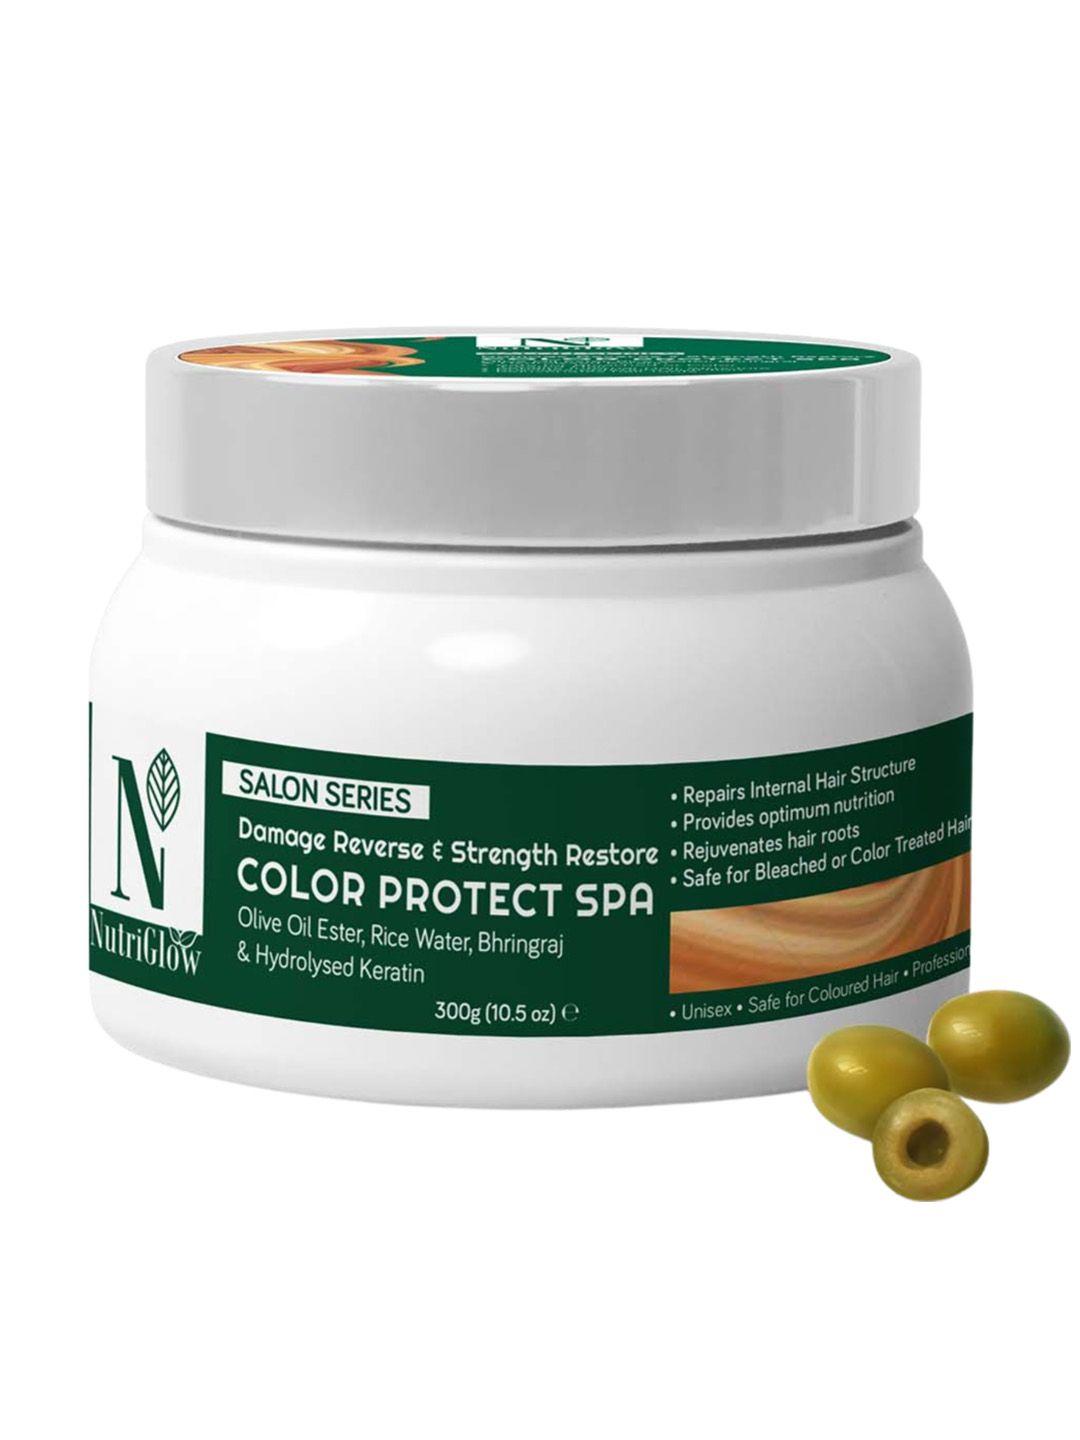 nutri glow color protect spa for color damage reverse & strength restore - 300gm